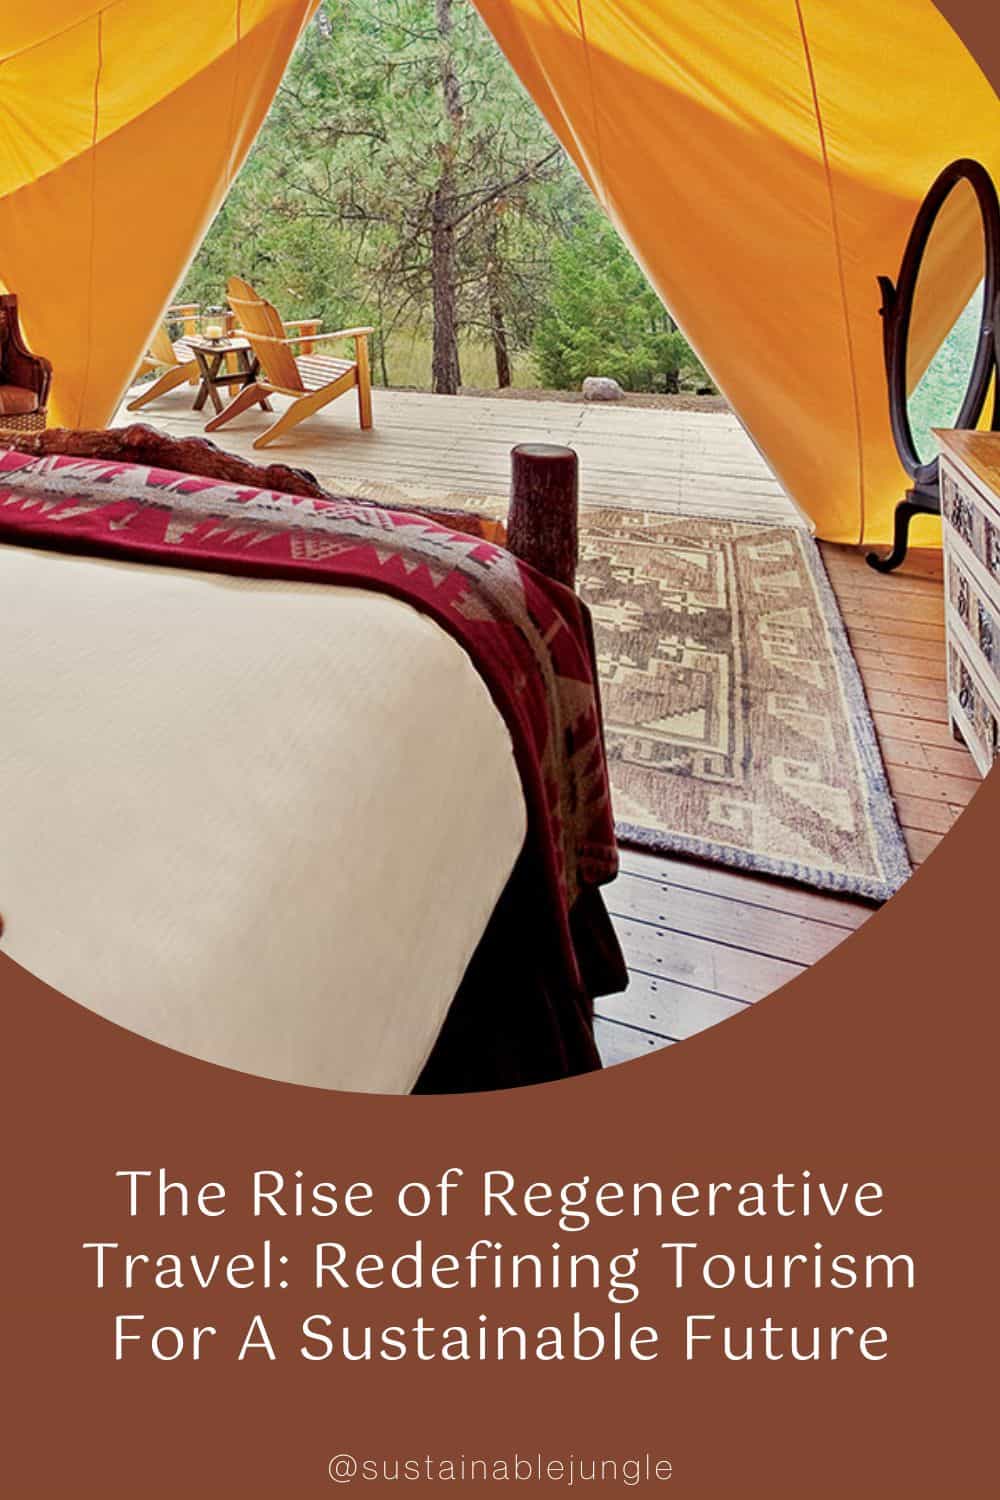 The Rise of Regenerative Travel: Redefining Tourism For A Sustainable Future Image by Regenerative Travel #regenerativetravel #whatisregenerativetravel #regenerativetourism #regenerativetravelexamples #regenerativetourismdefinition #regenerativetourismdestinations #sustainablejungle